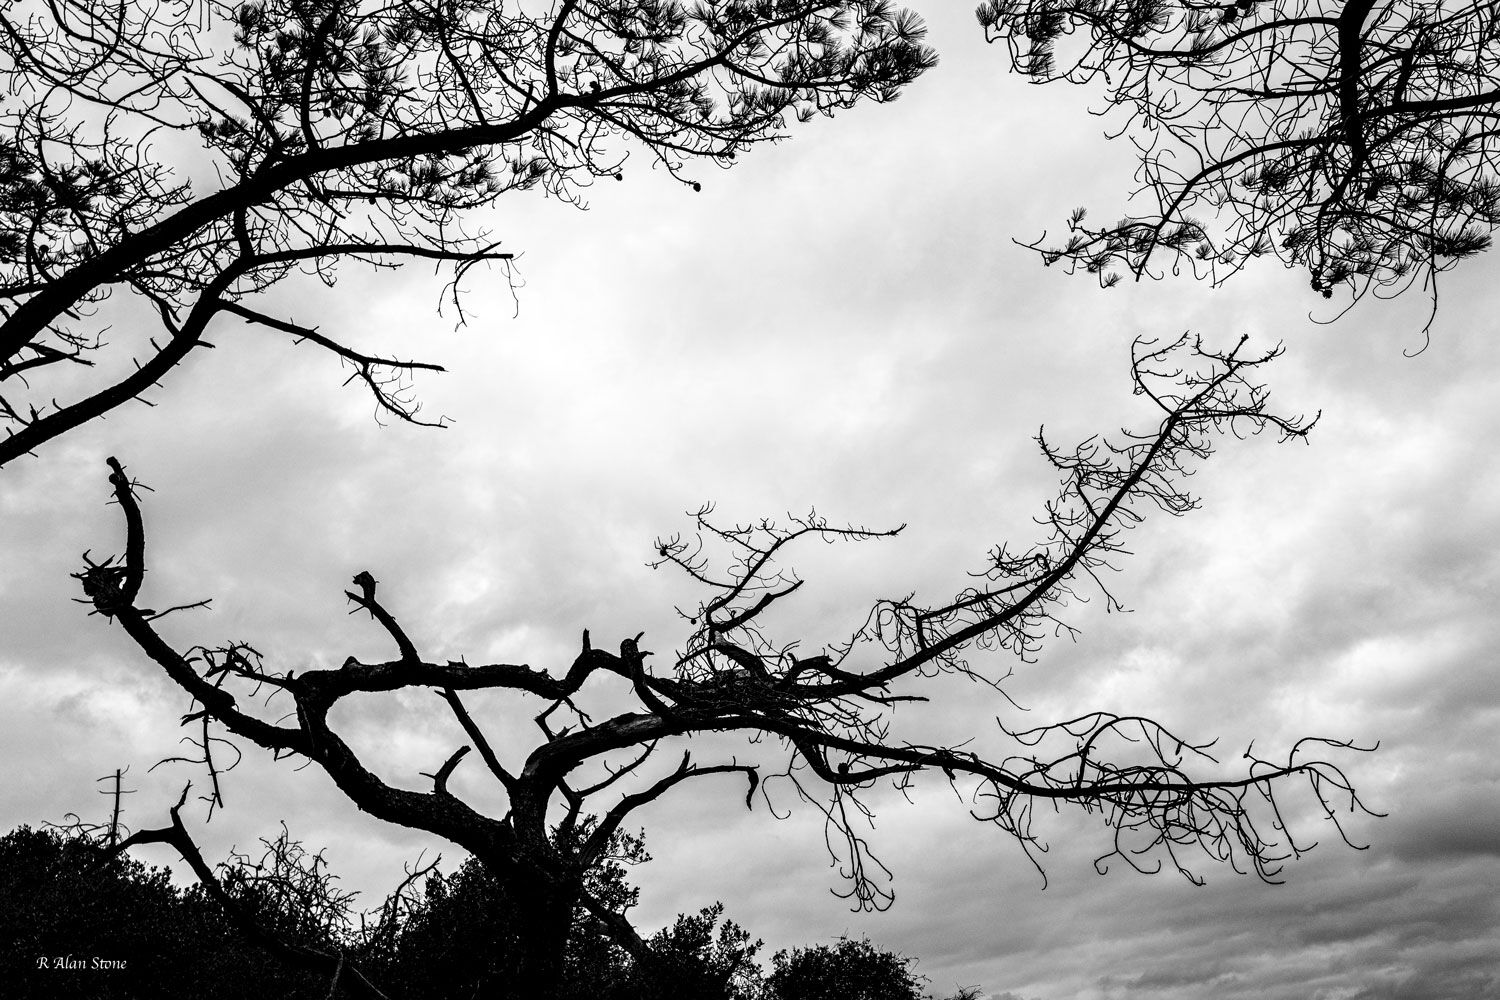 I have walked by this tree many times hoping to capture an image that would mean something. The dead branches reaching out into...